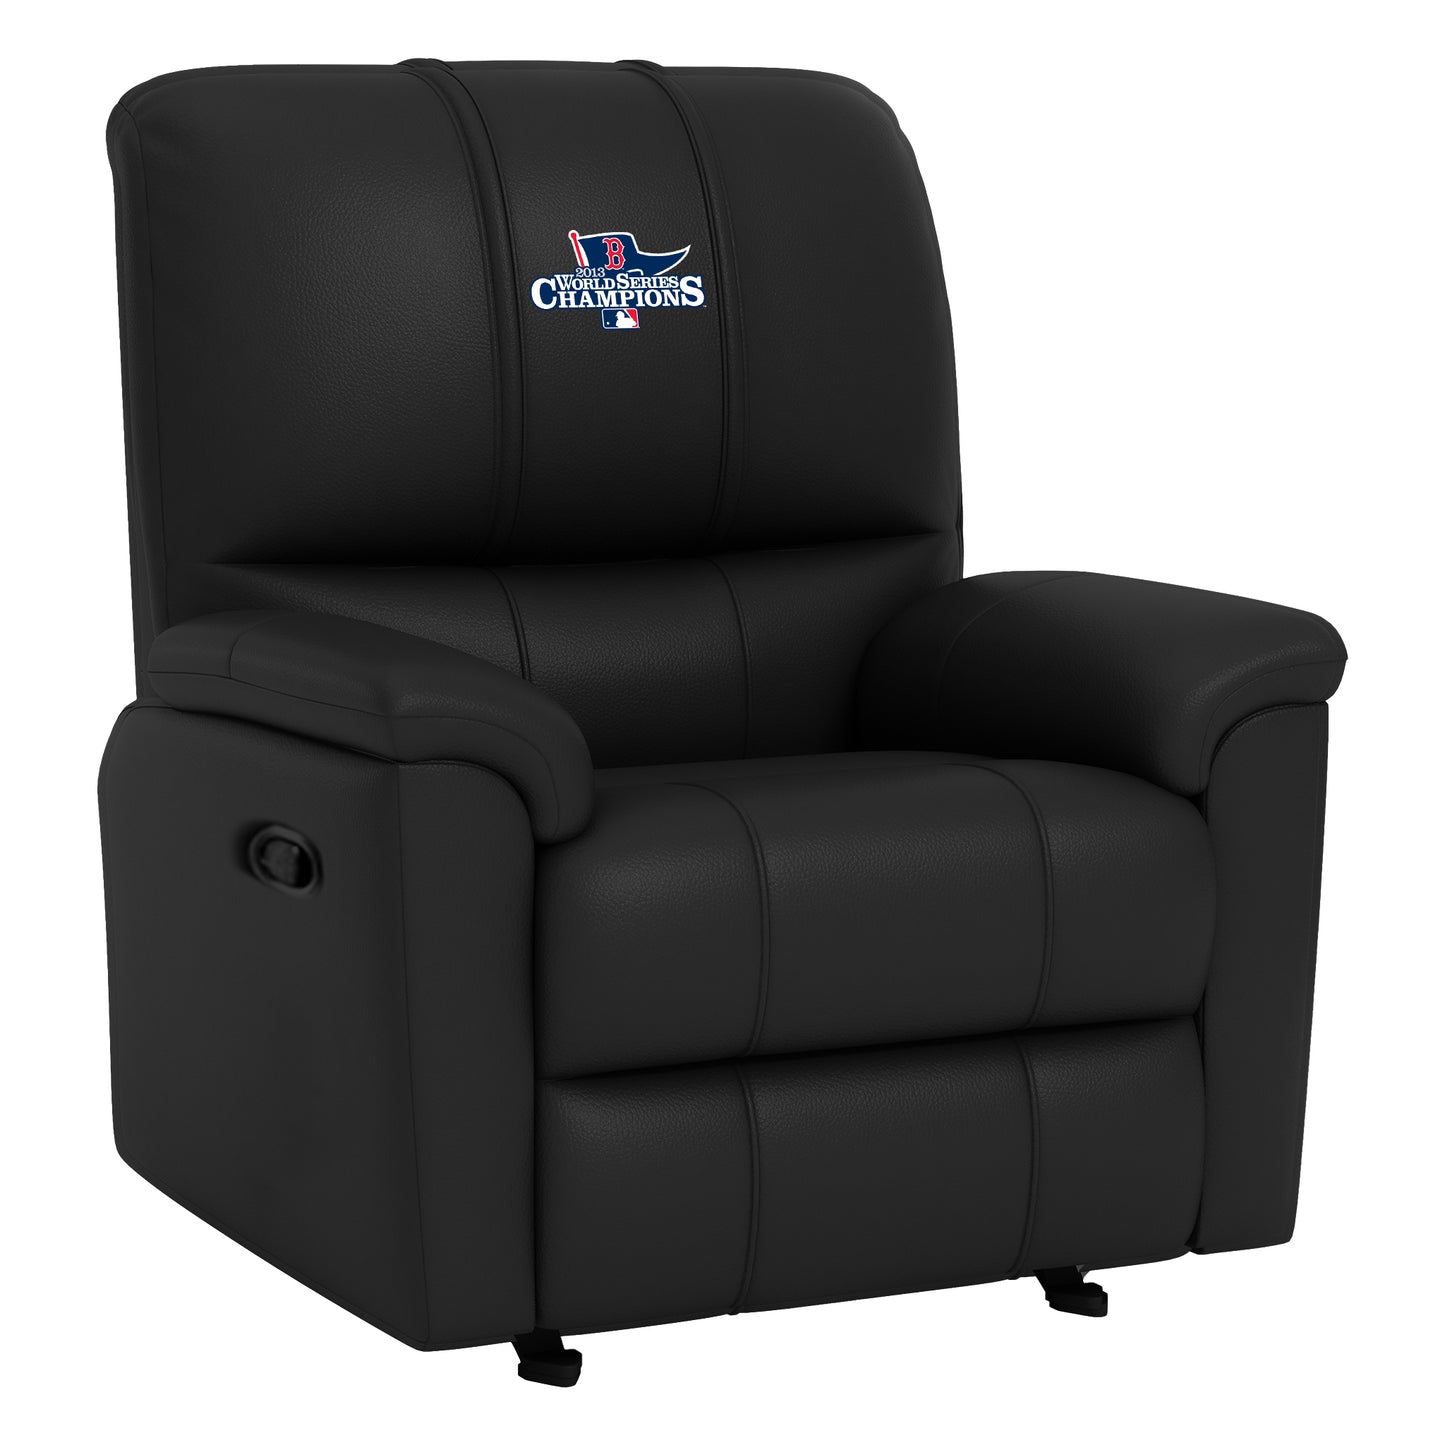 Rocker Recliner with Boston Red Sox Champs 2013